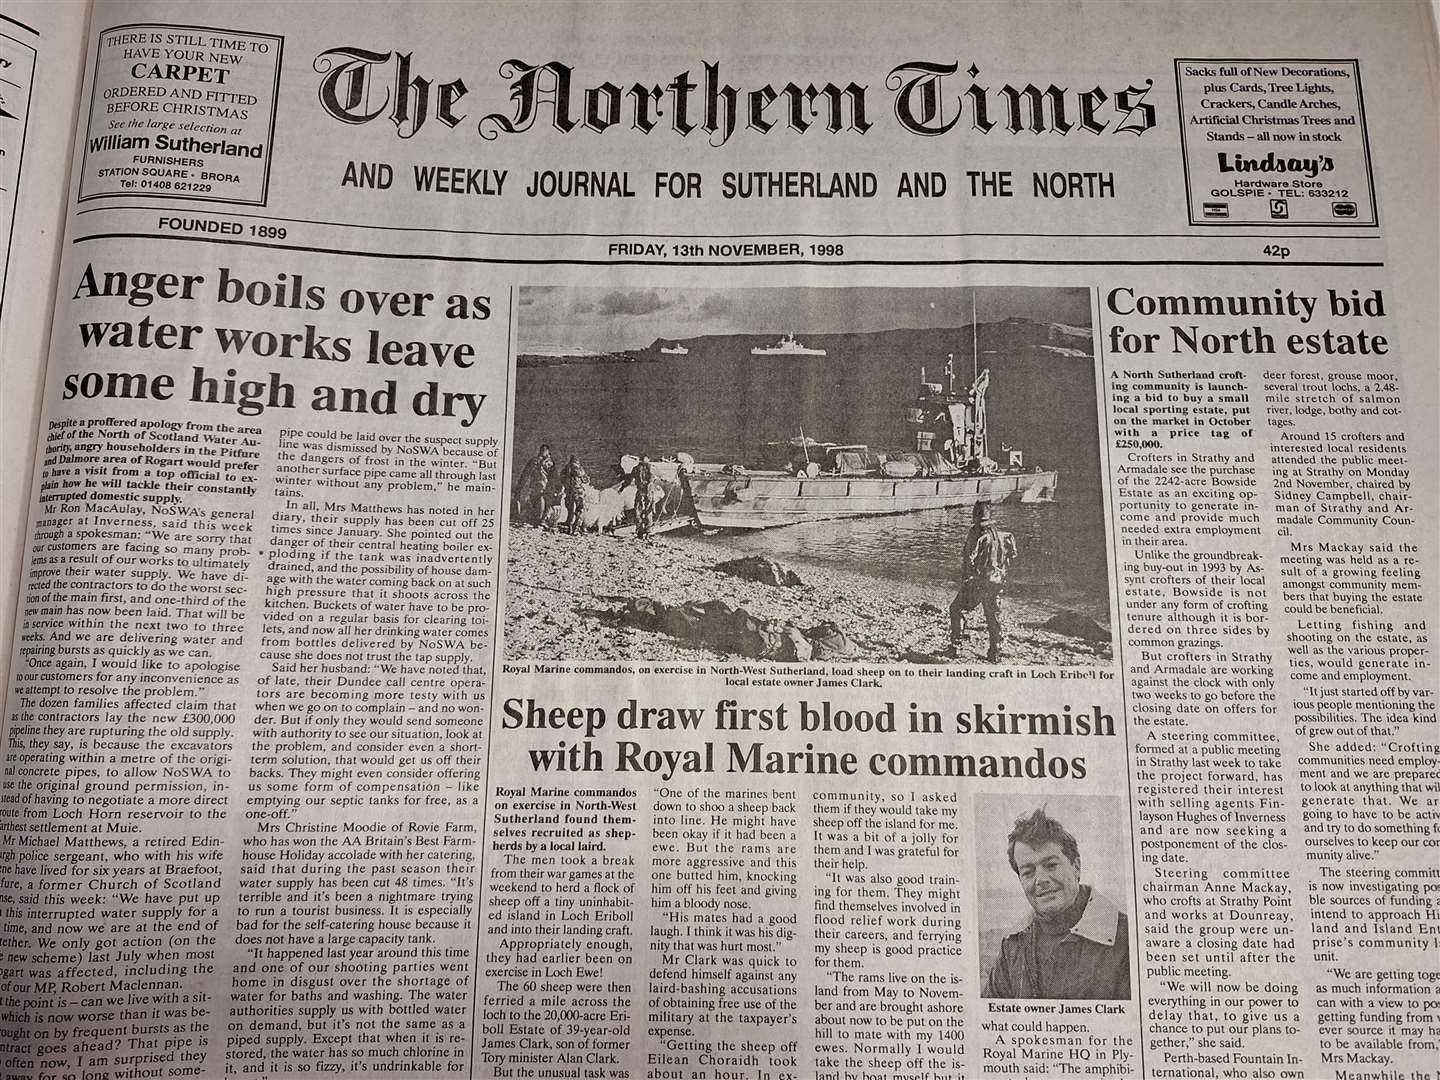 The edition of November 13, 1998.